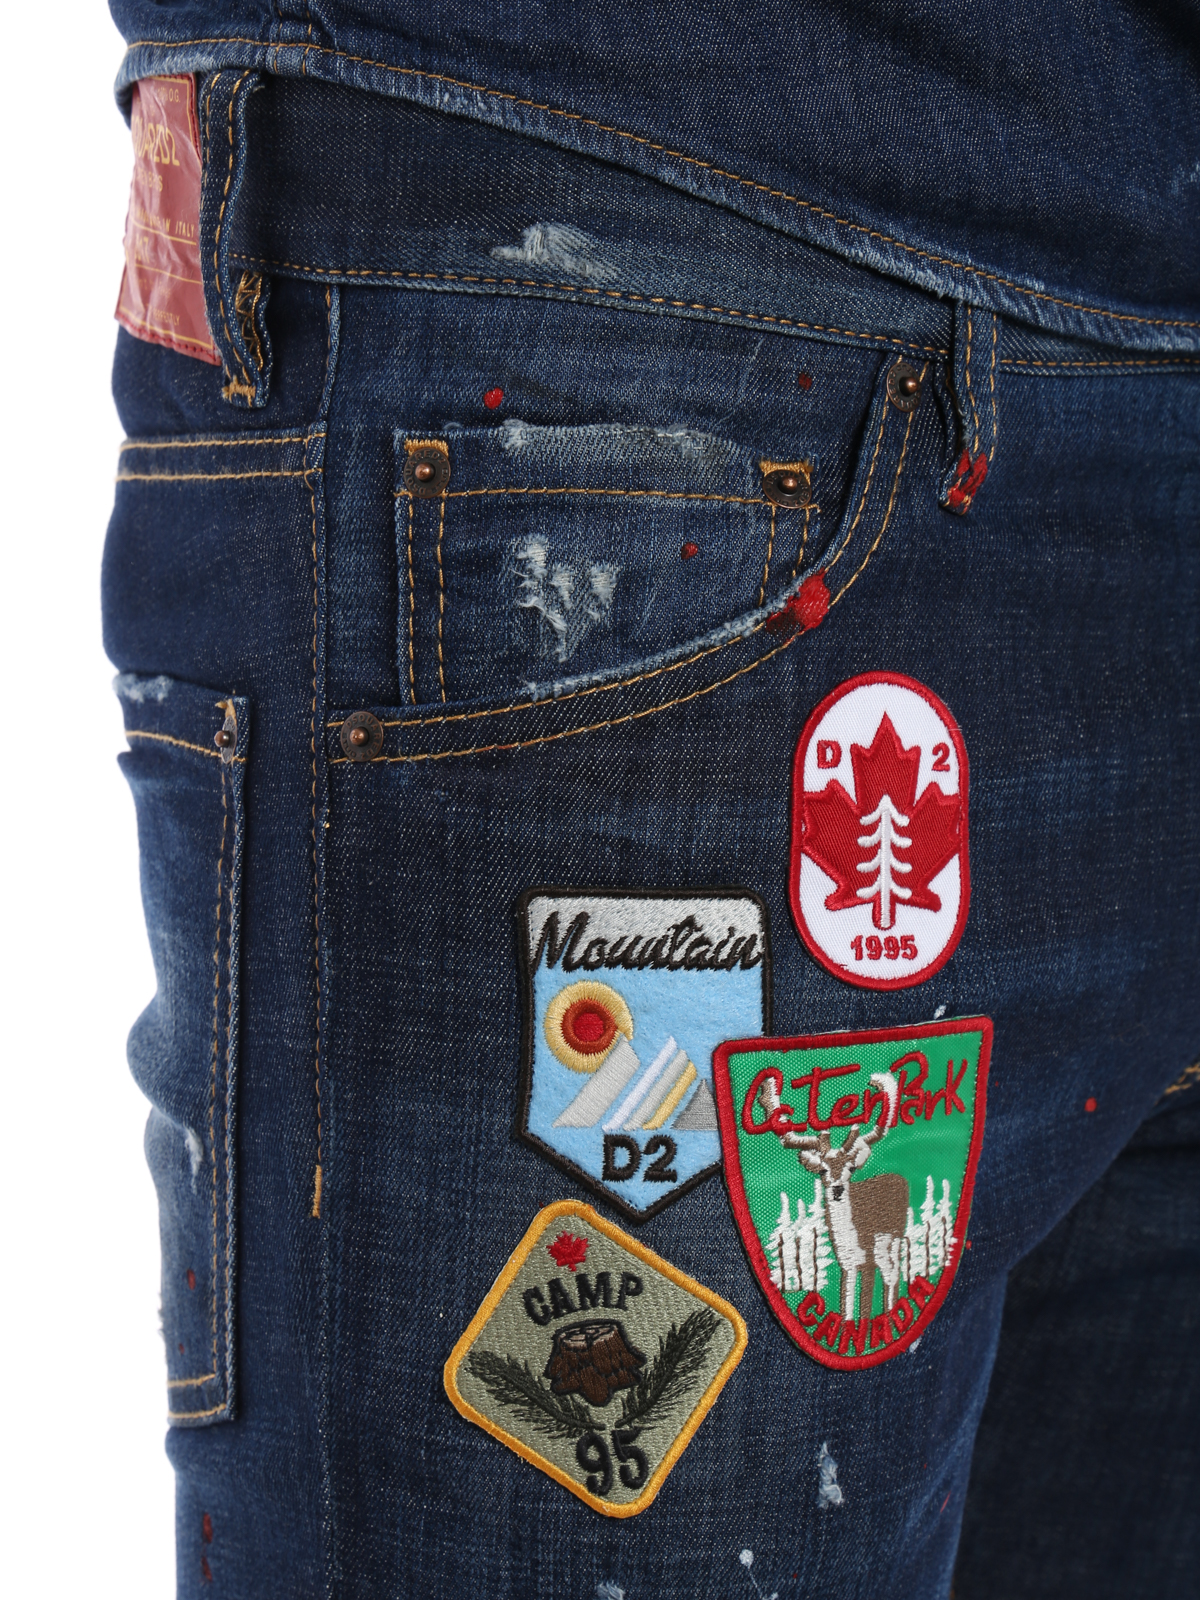 dsquared jeans with patches